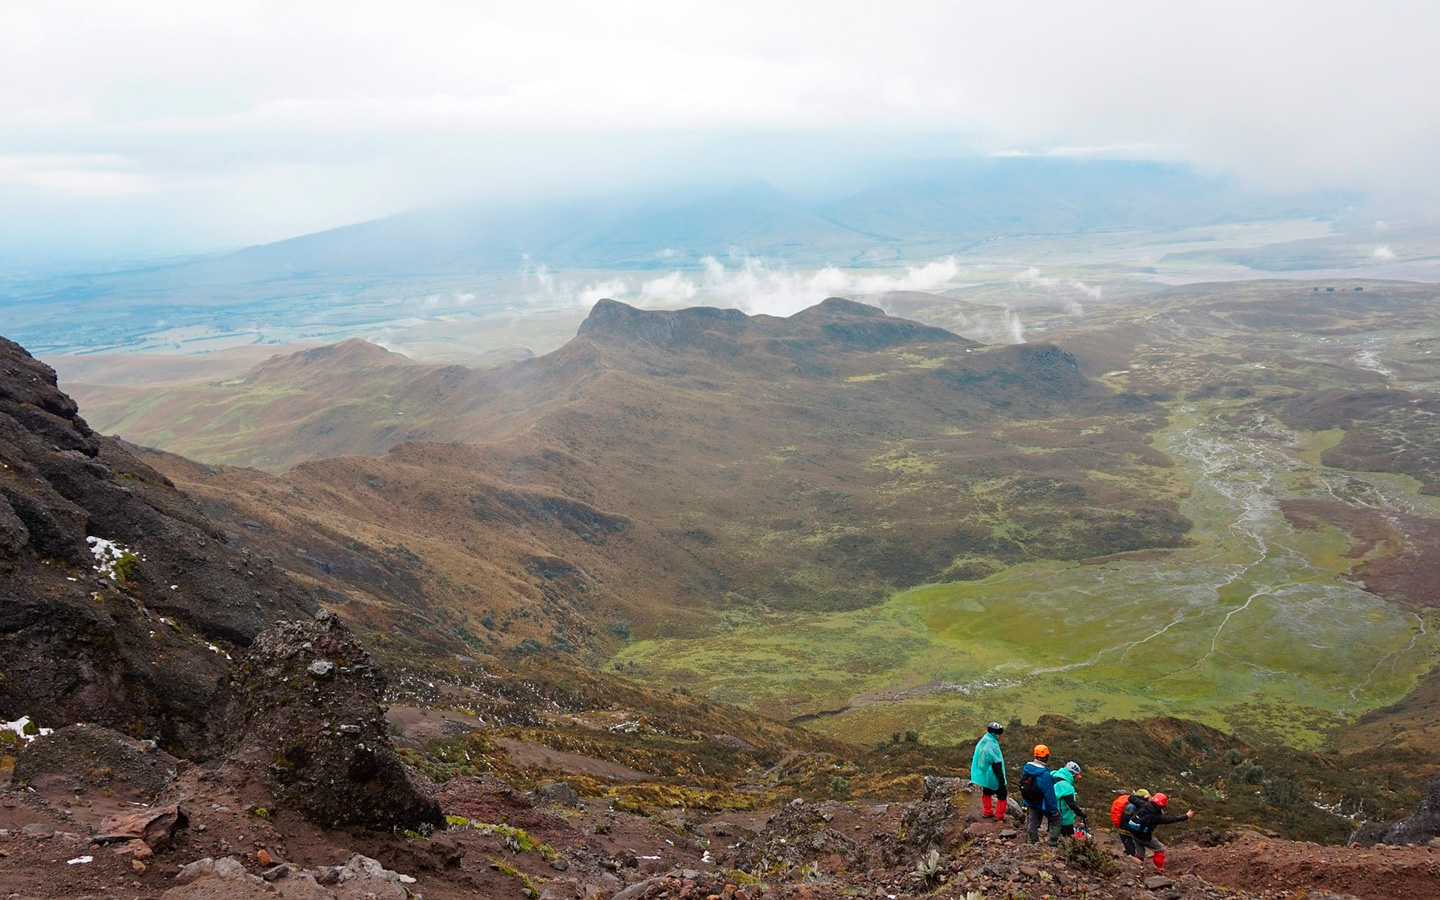 Students hiking down from the summit of Cotopaxi